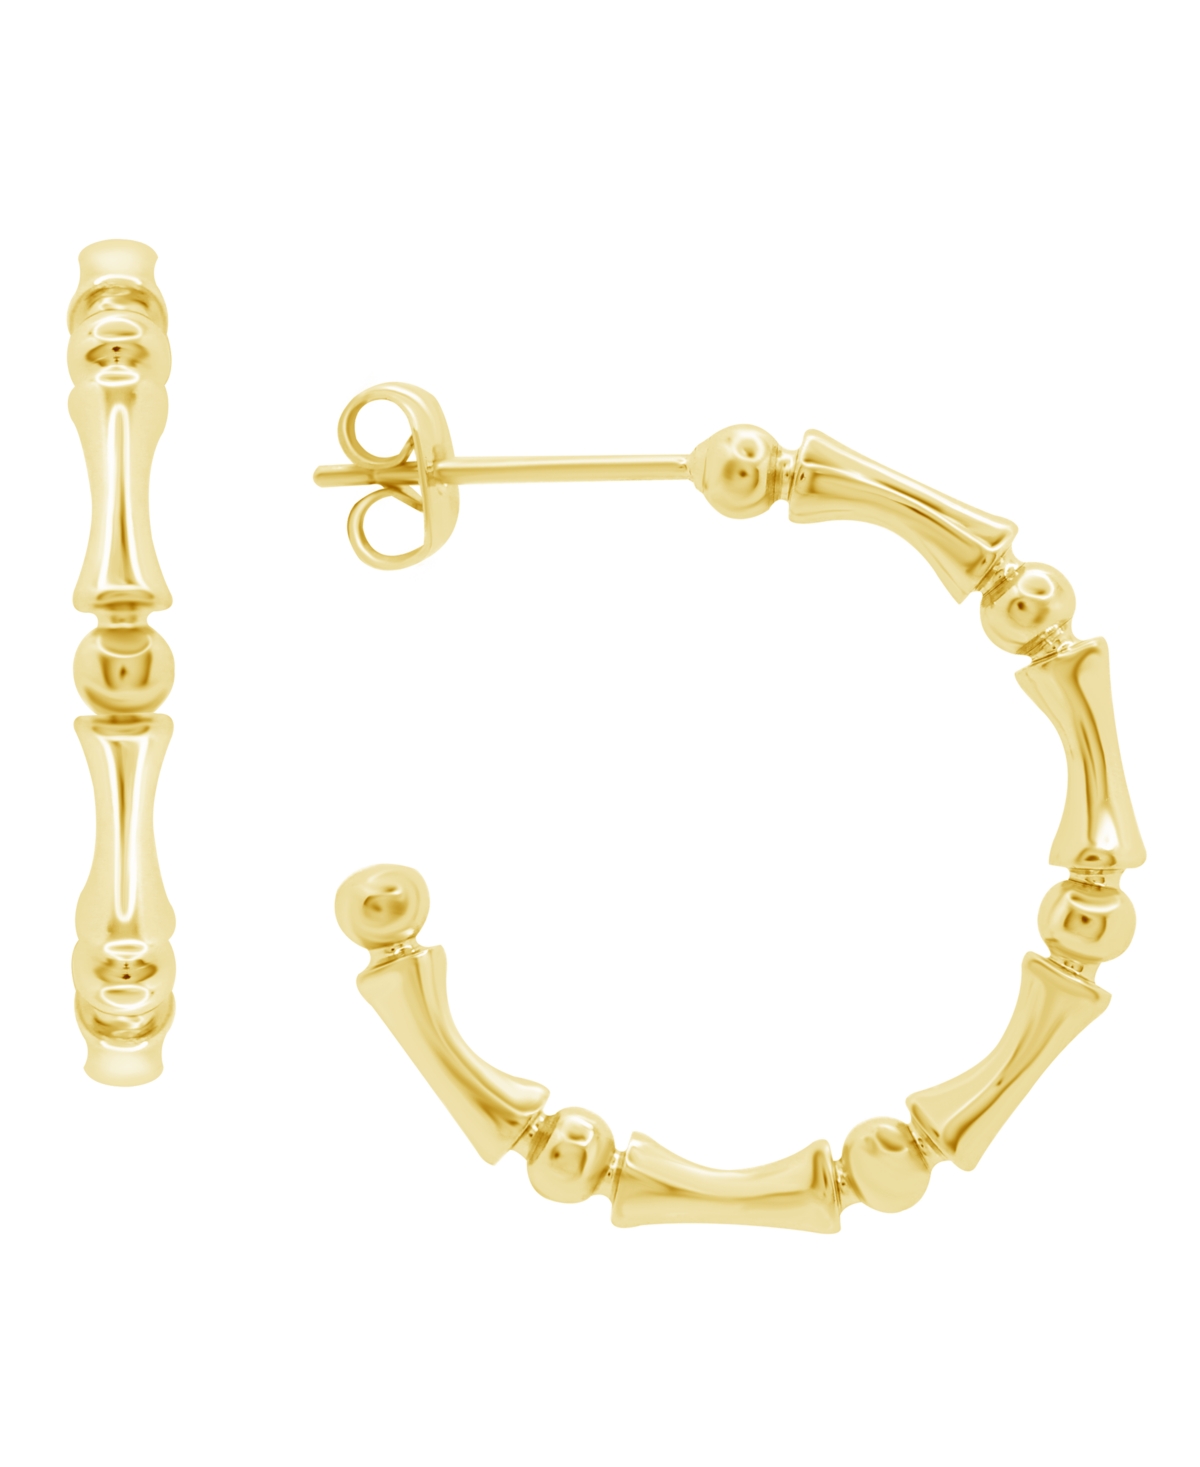 And Now This High Polished C Hoop Earring, Gold Plate - Gold-Tone